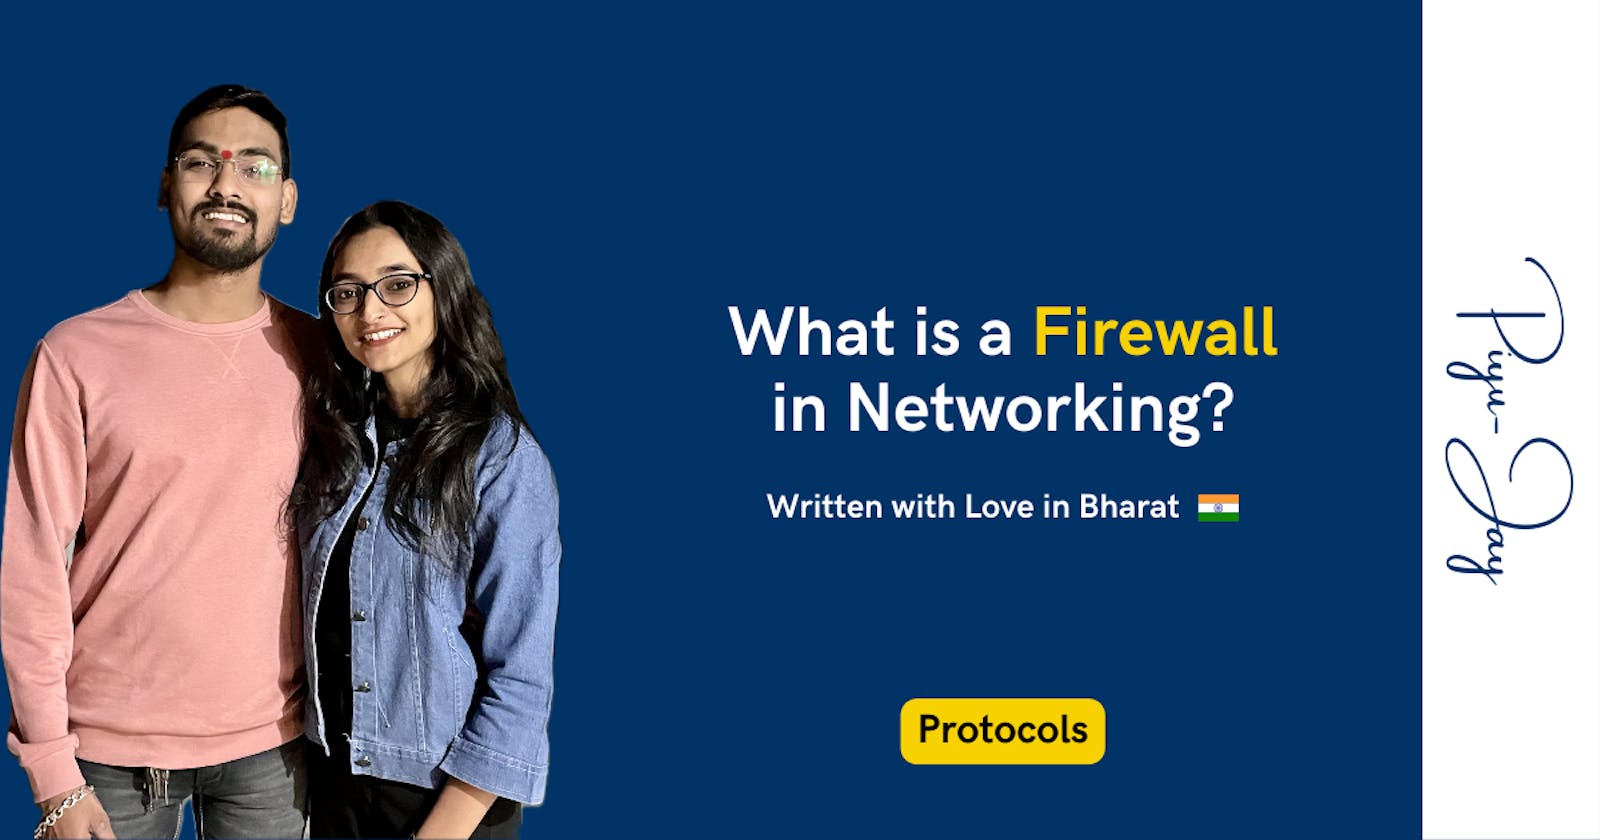 What is a Firewall in Networking?